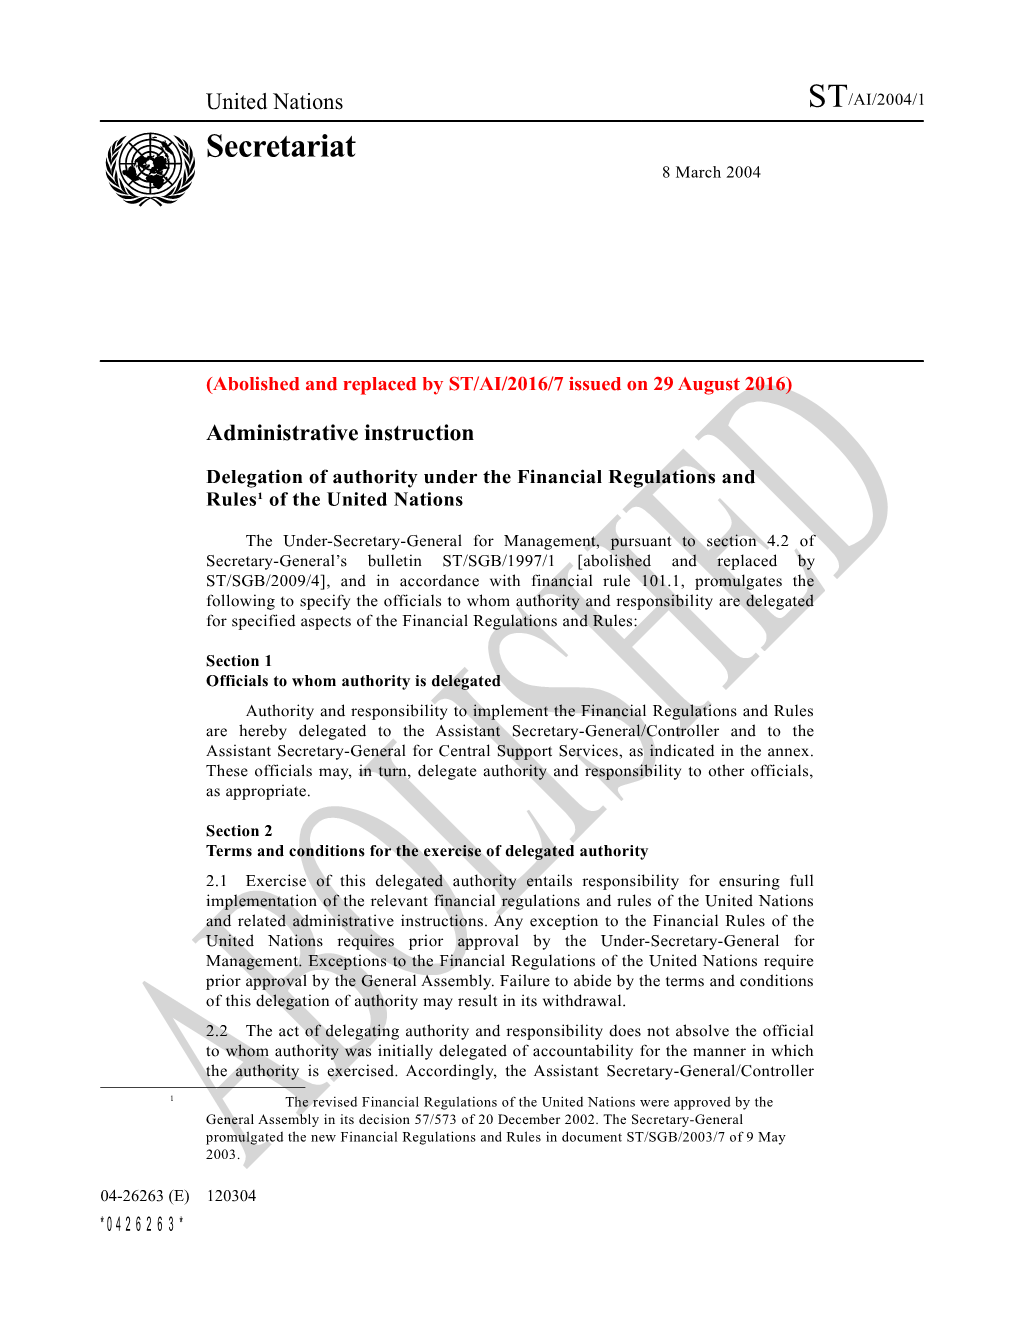 Delegation of Authority Under the Financial Regulations and Rules 1 of the United Nations